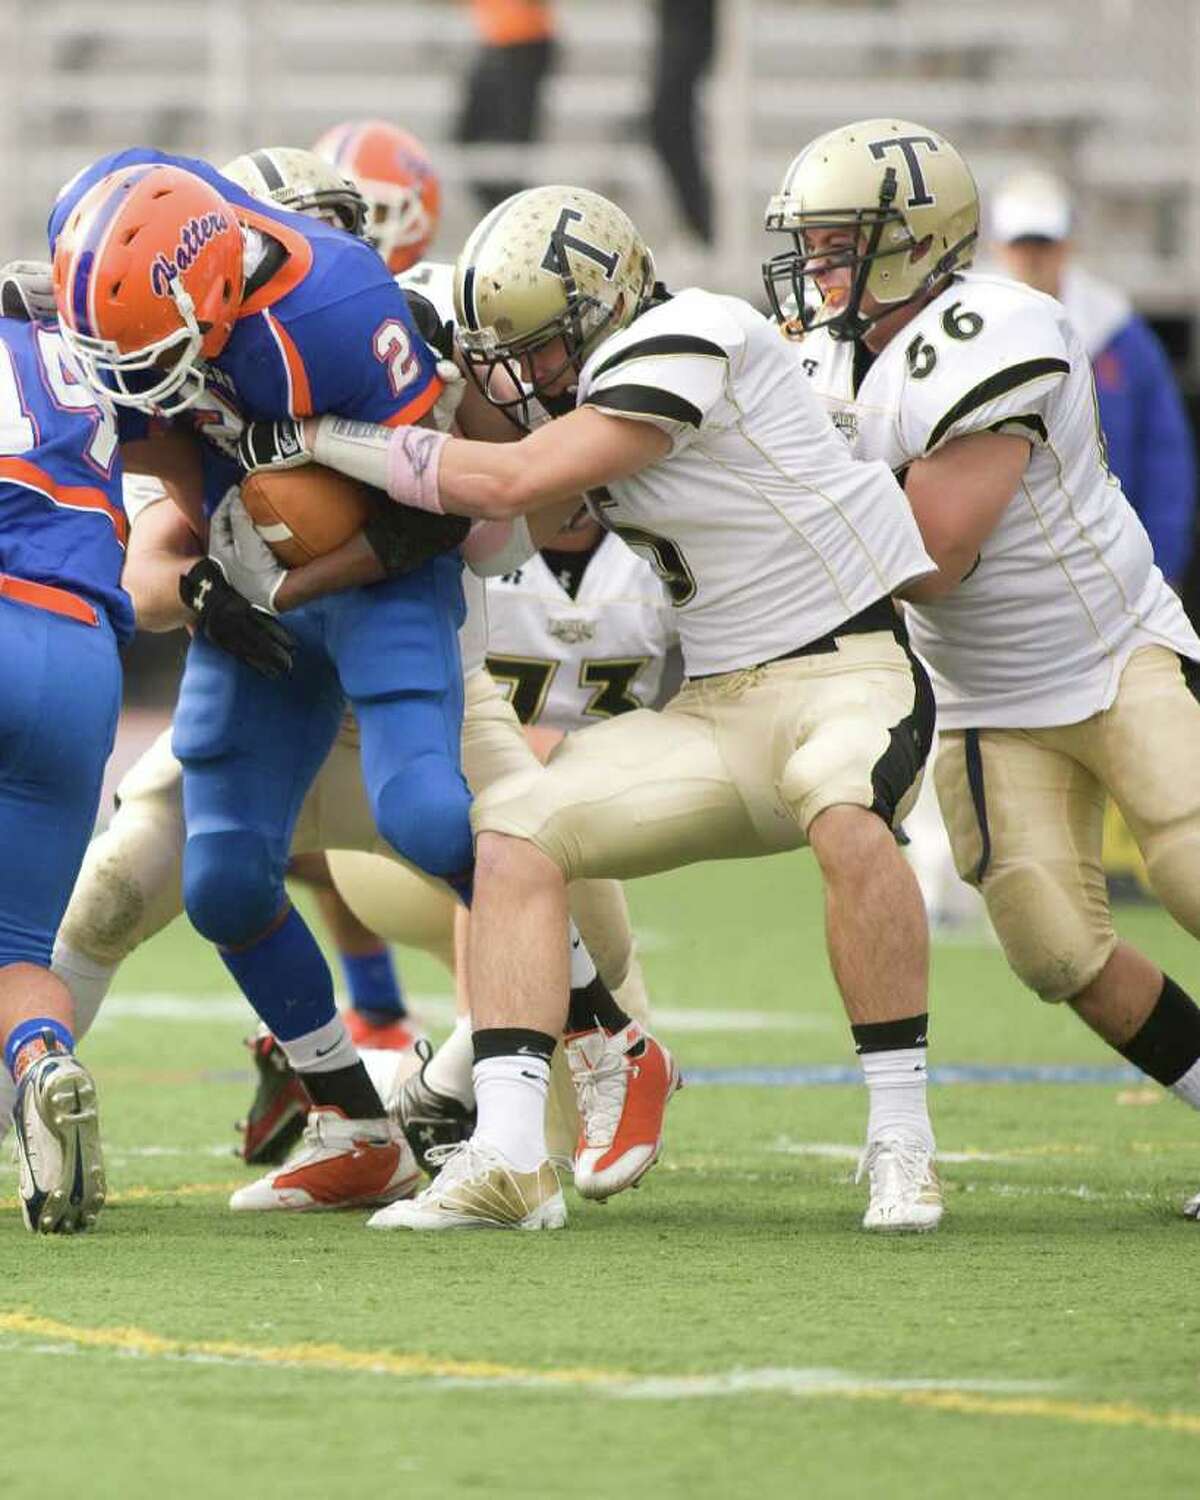 Trumbull's Tom Pauciello (5) tries to strip the ball from Danbury's Aaron Dixon during their FCIAC game Saturday, Oct. 30, 2010, at Danbury High School.